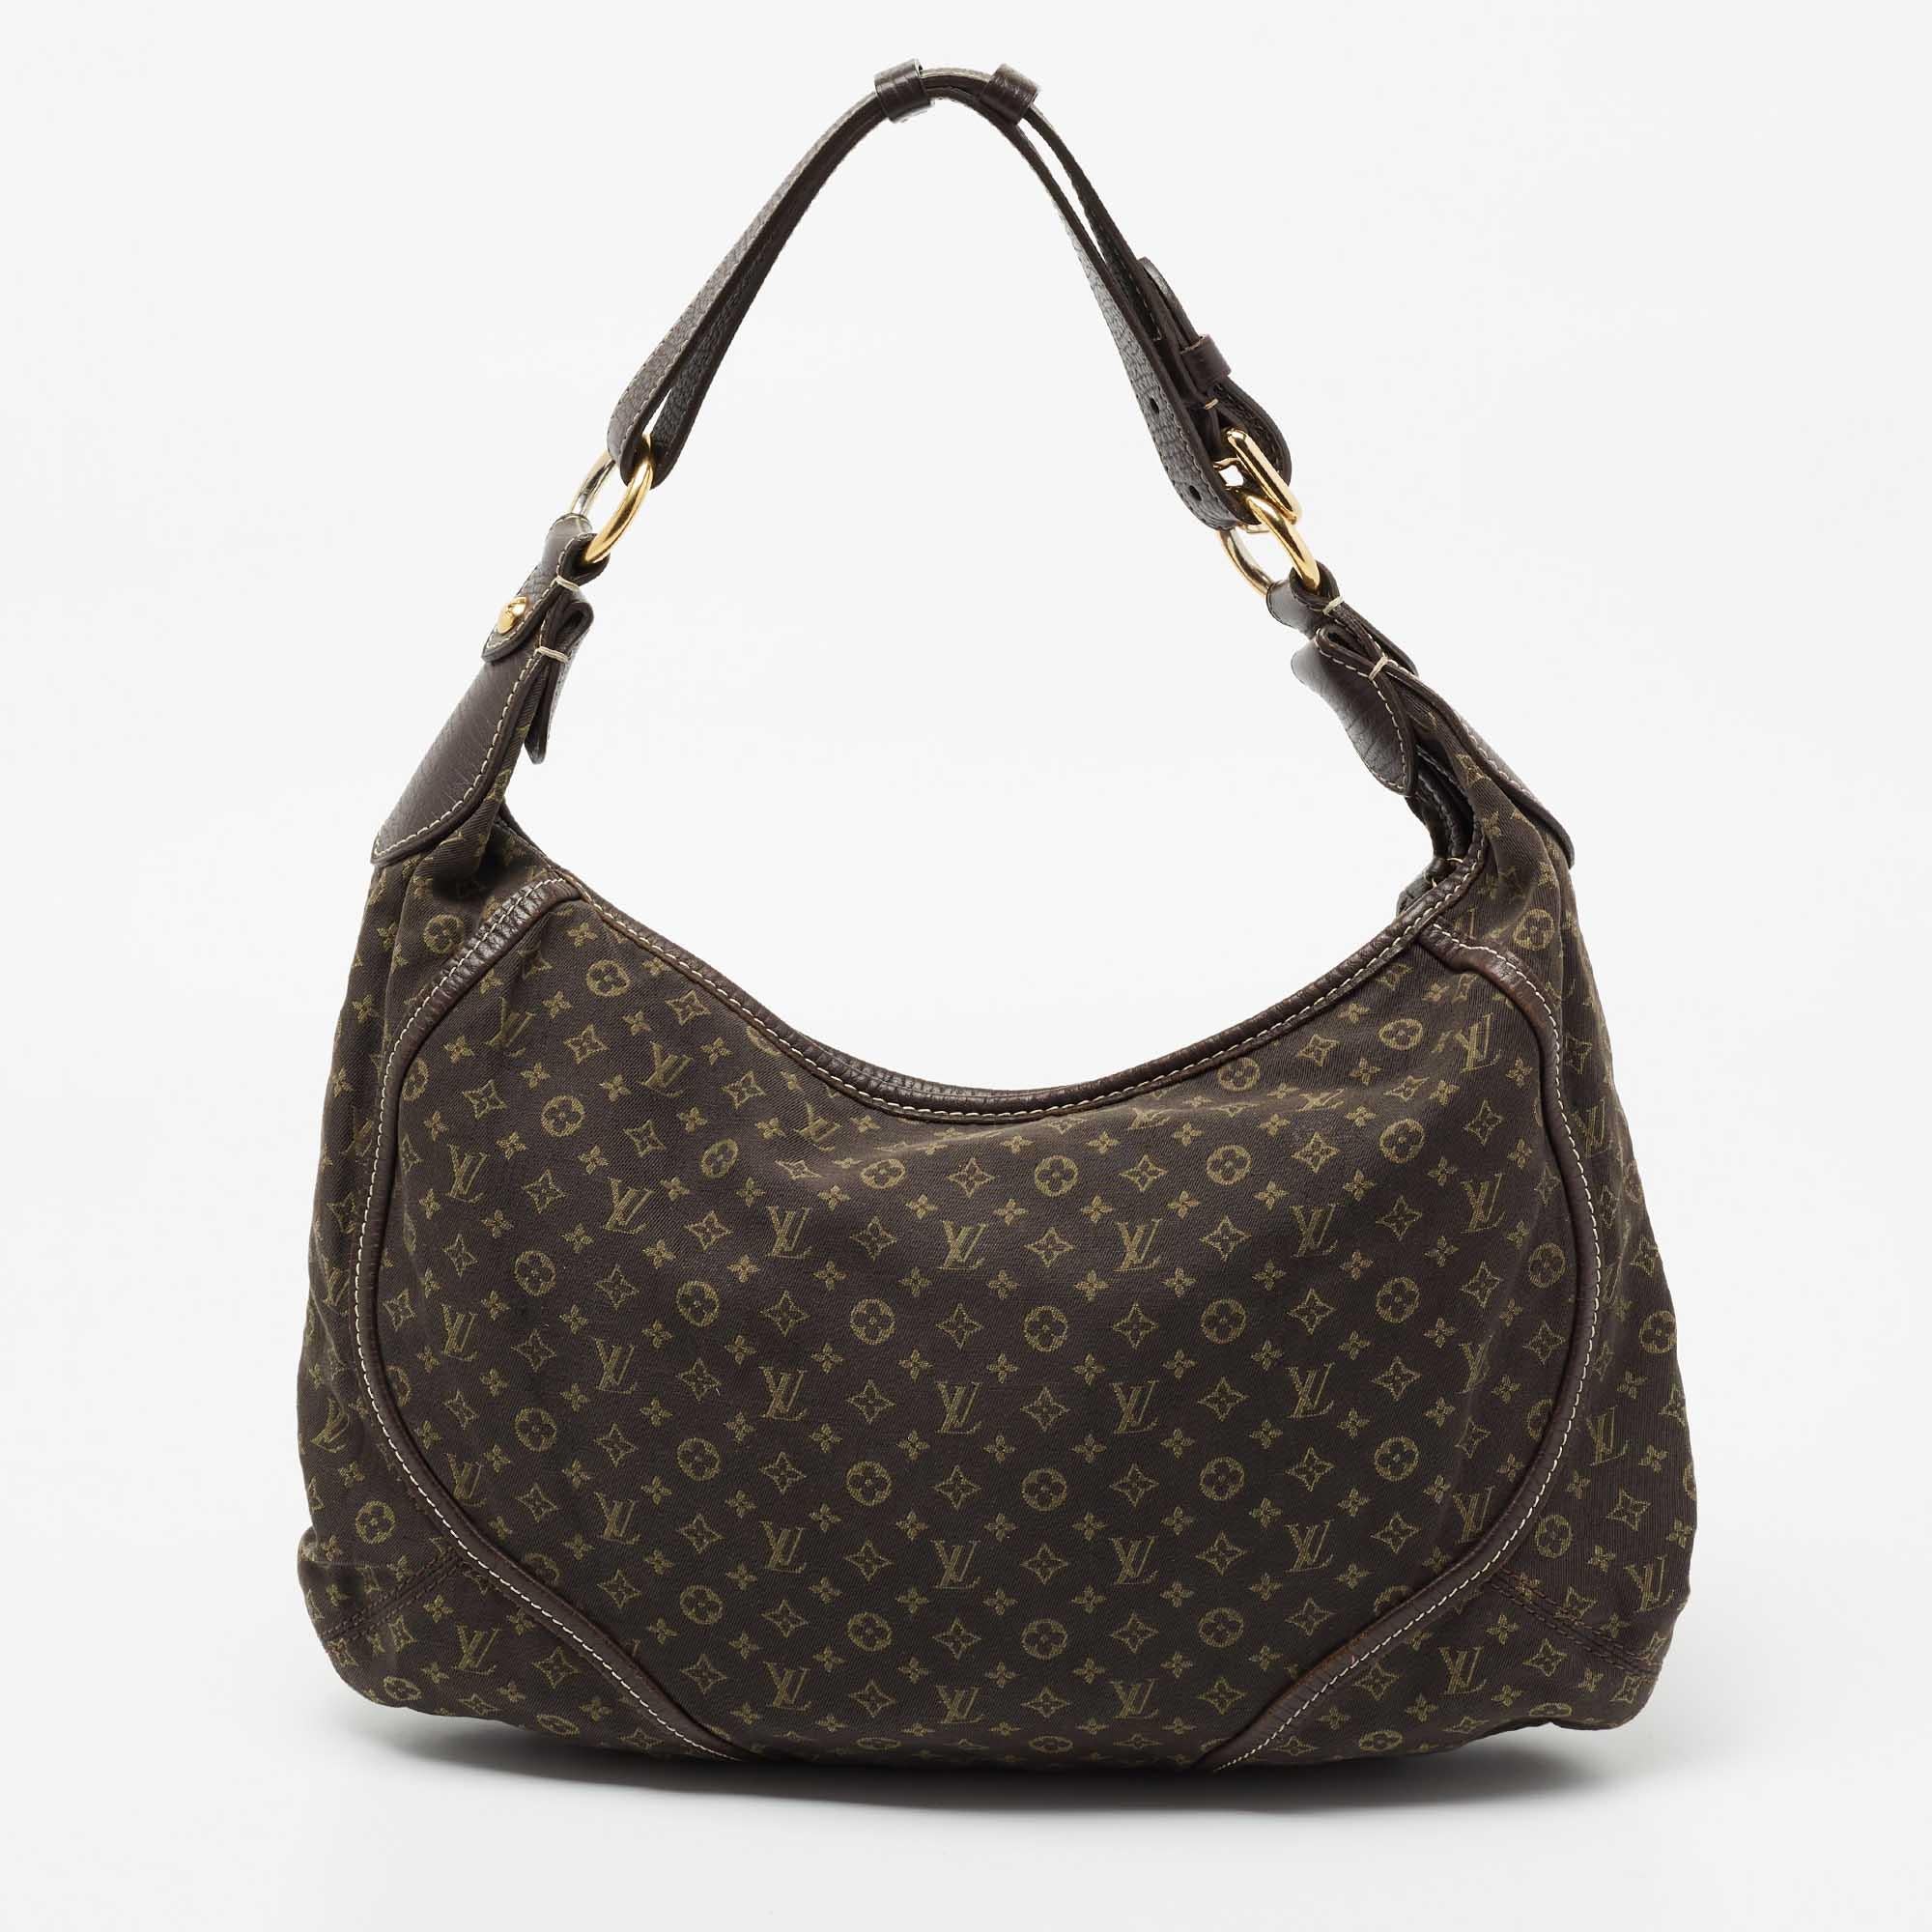 This classic design of Louis Vuitton will never go out of style. This brown bag is crafted using Monogram canvas and includes leather trims. It features a spacious interior and an adjustable handle. Add it to your closet today!

